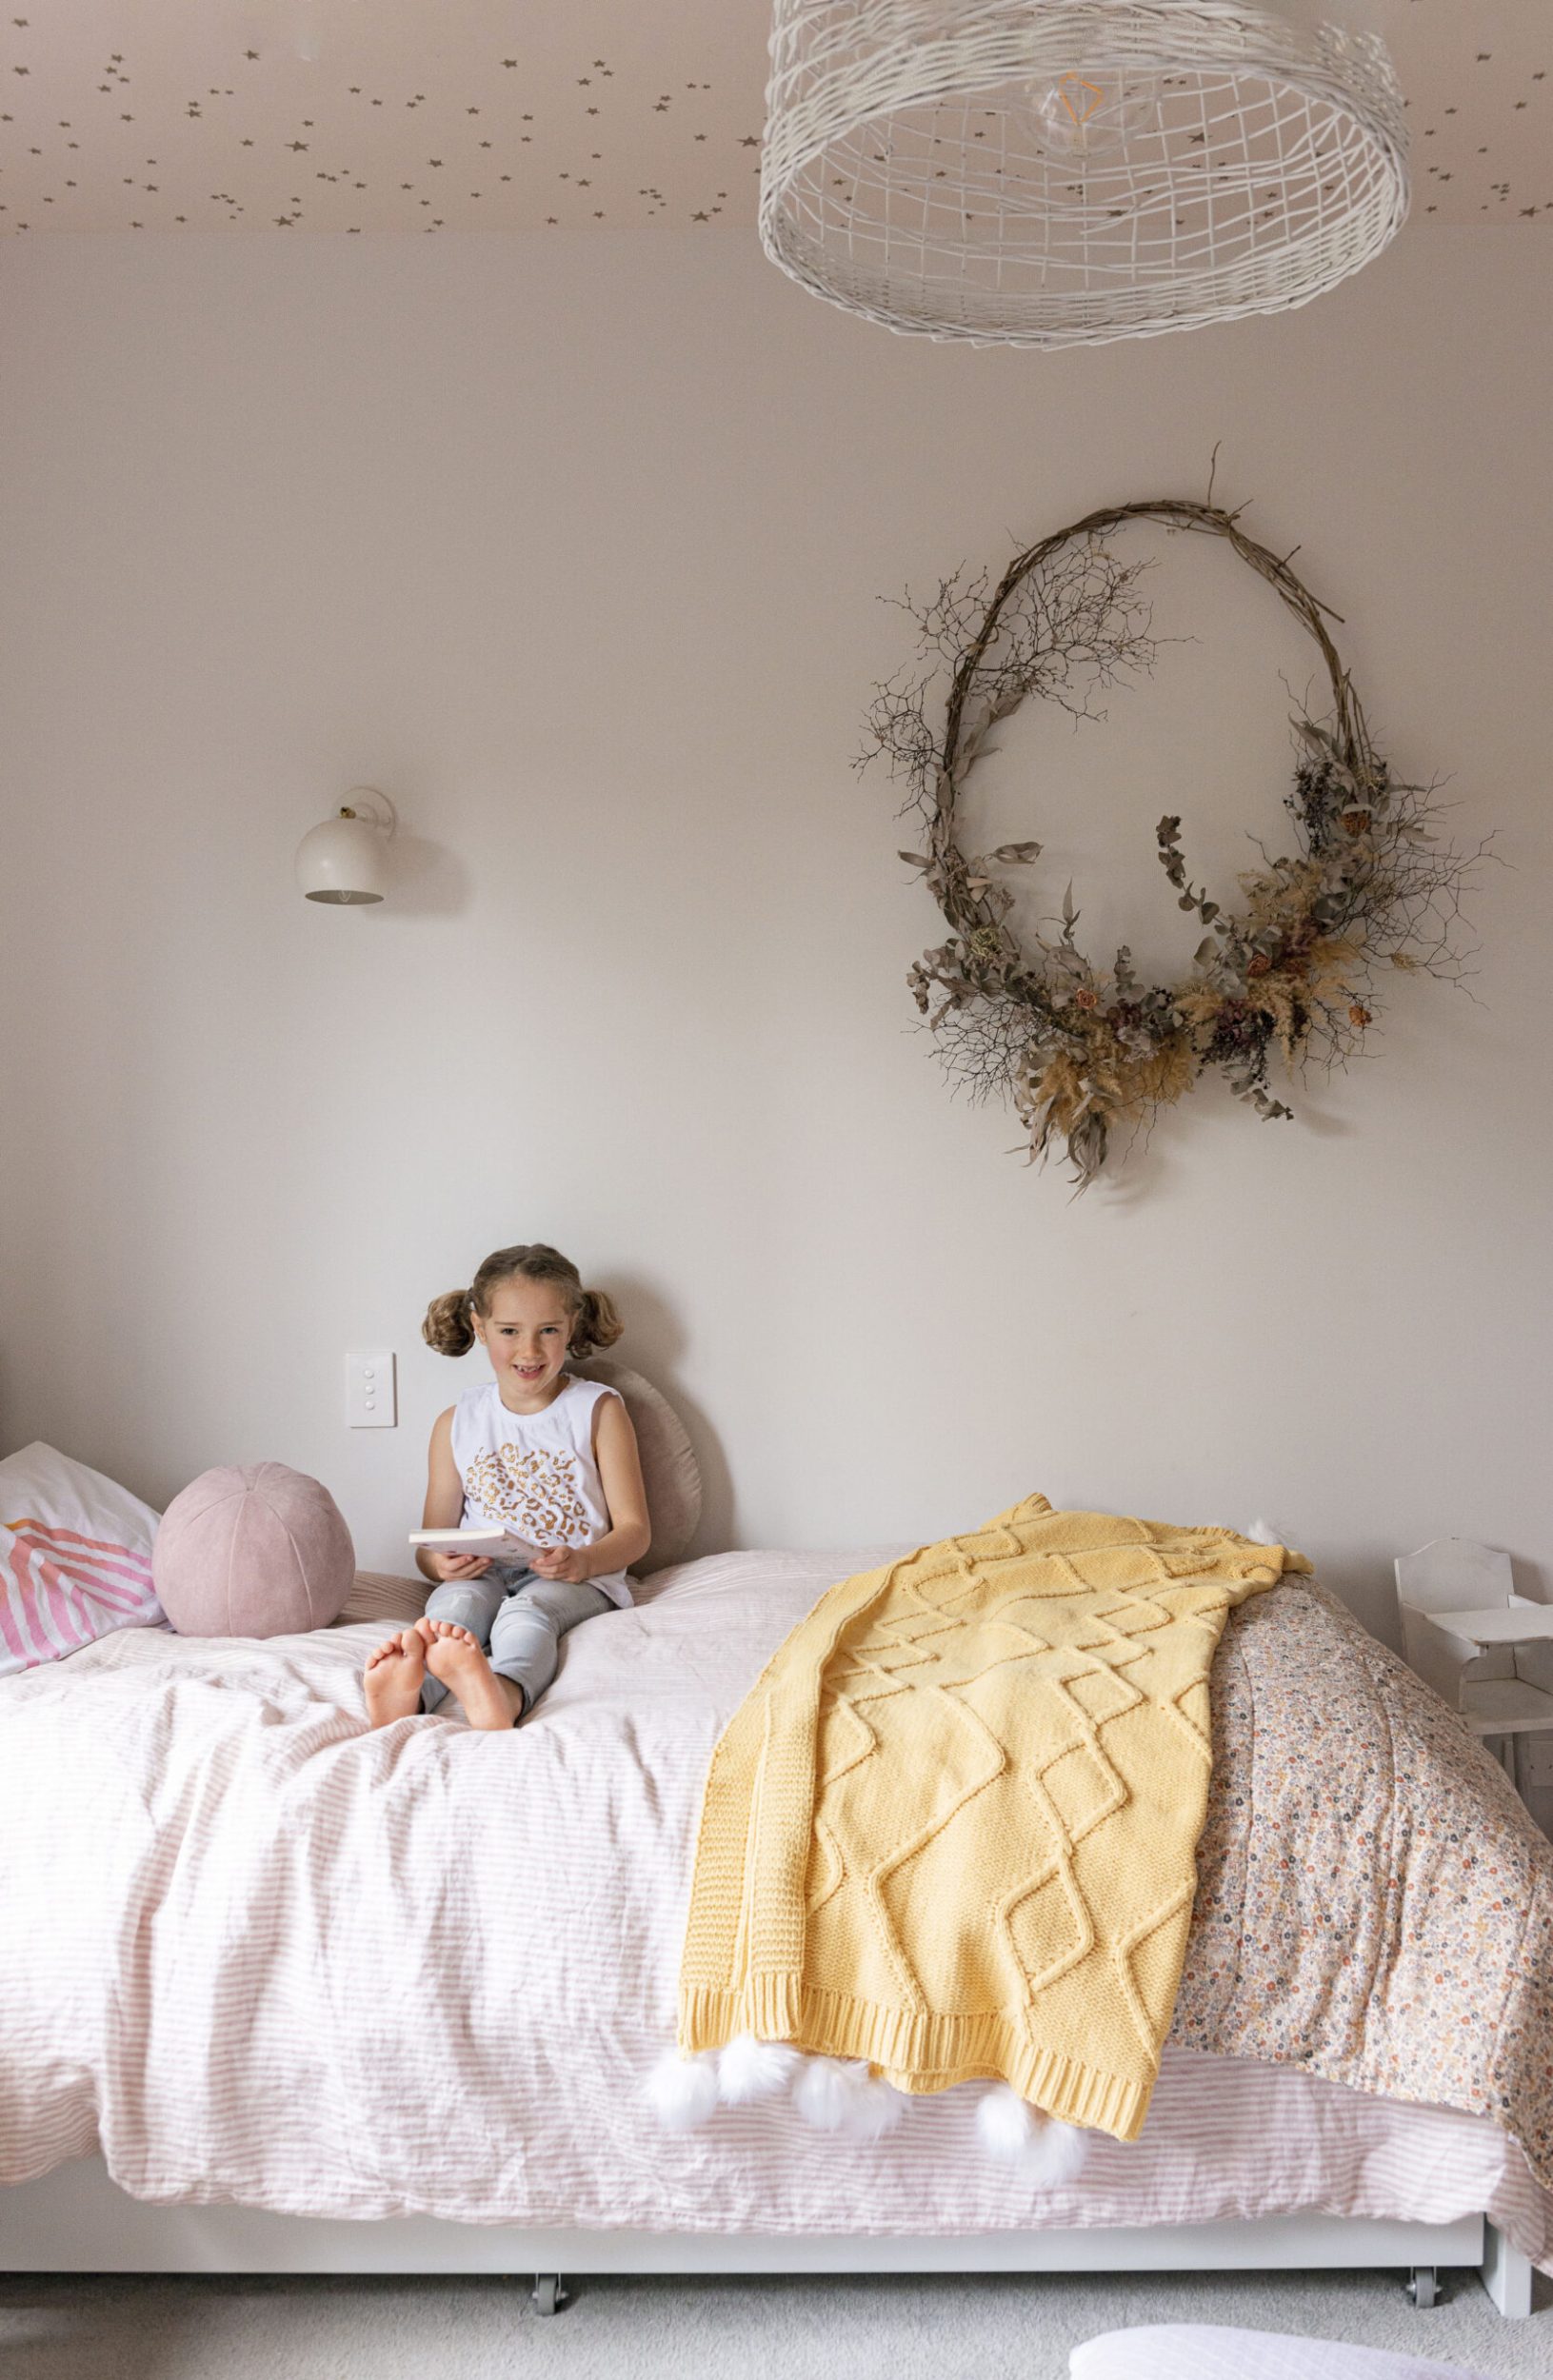 A young girl sitting on her bed with a floral arrangement on the wall and a pastel pink duvet